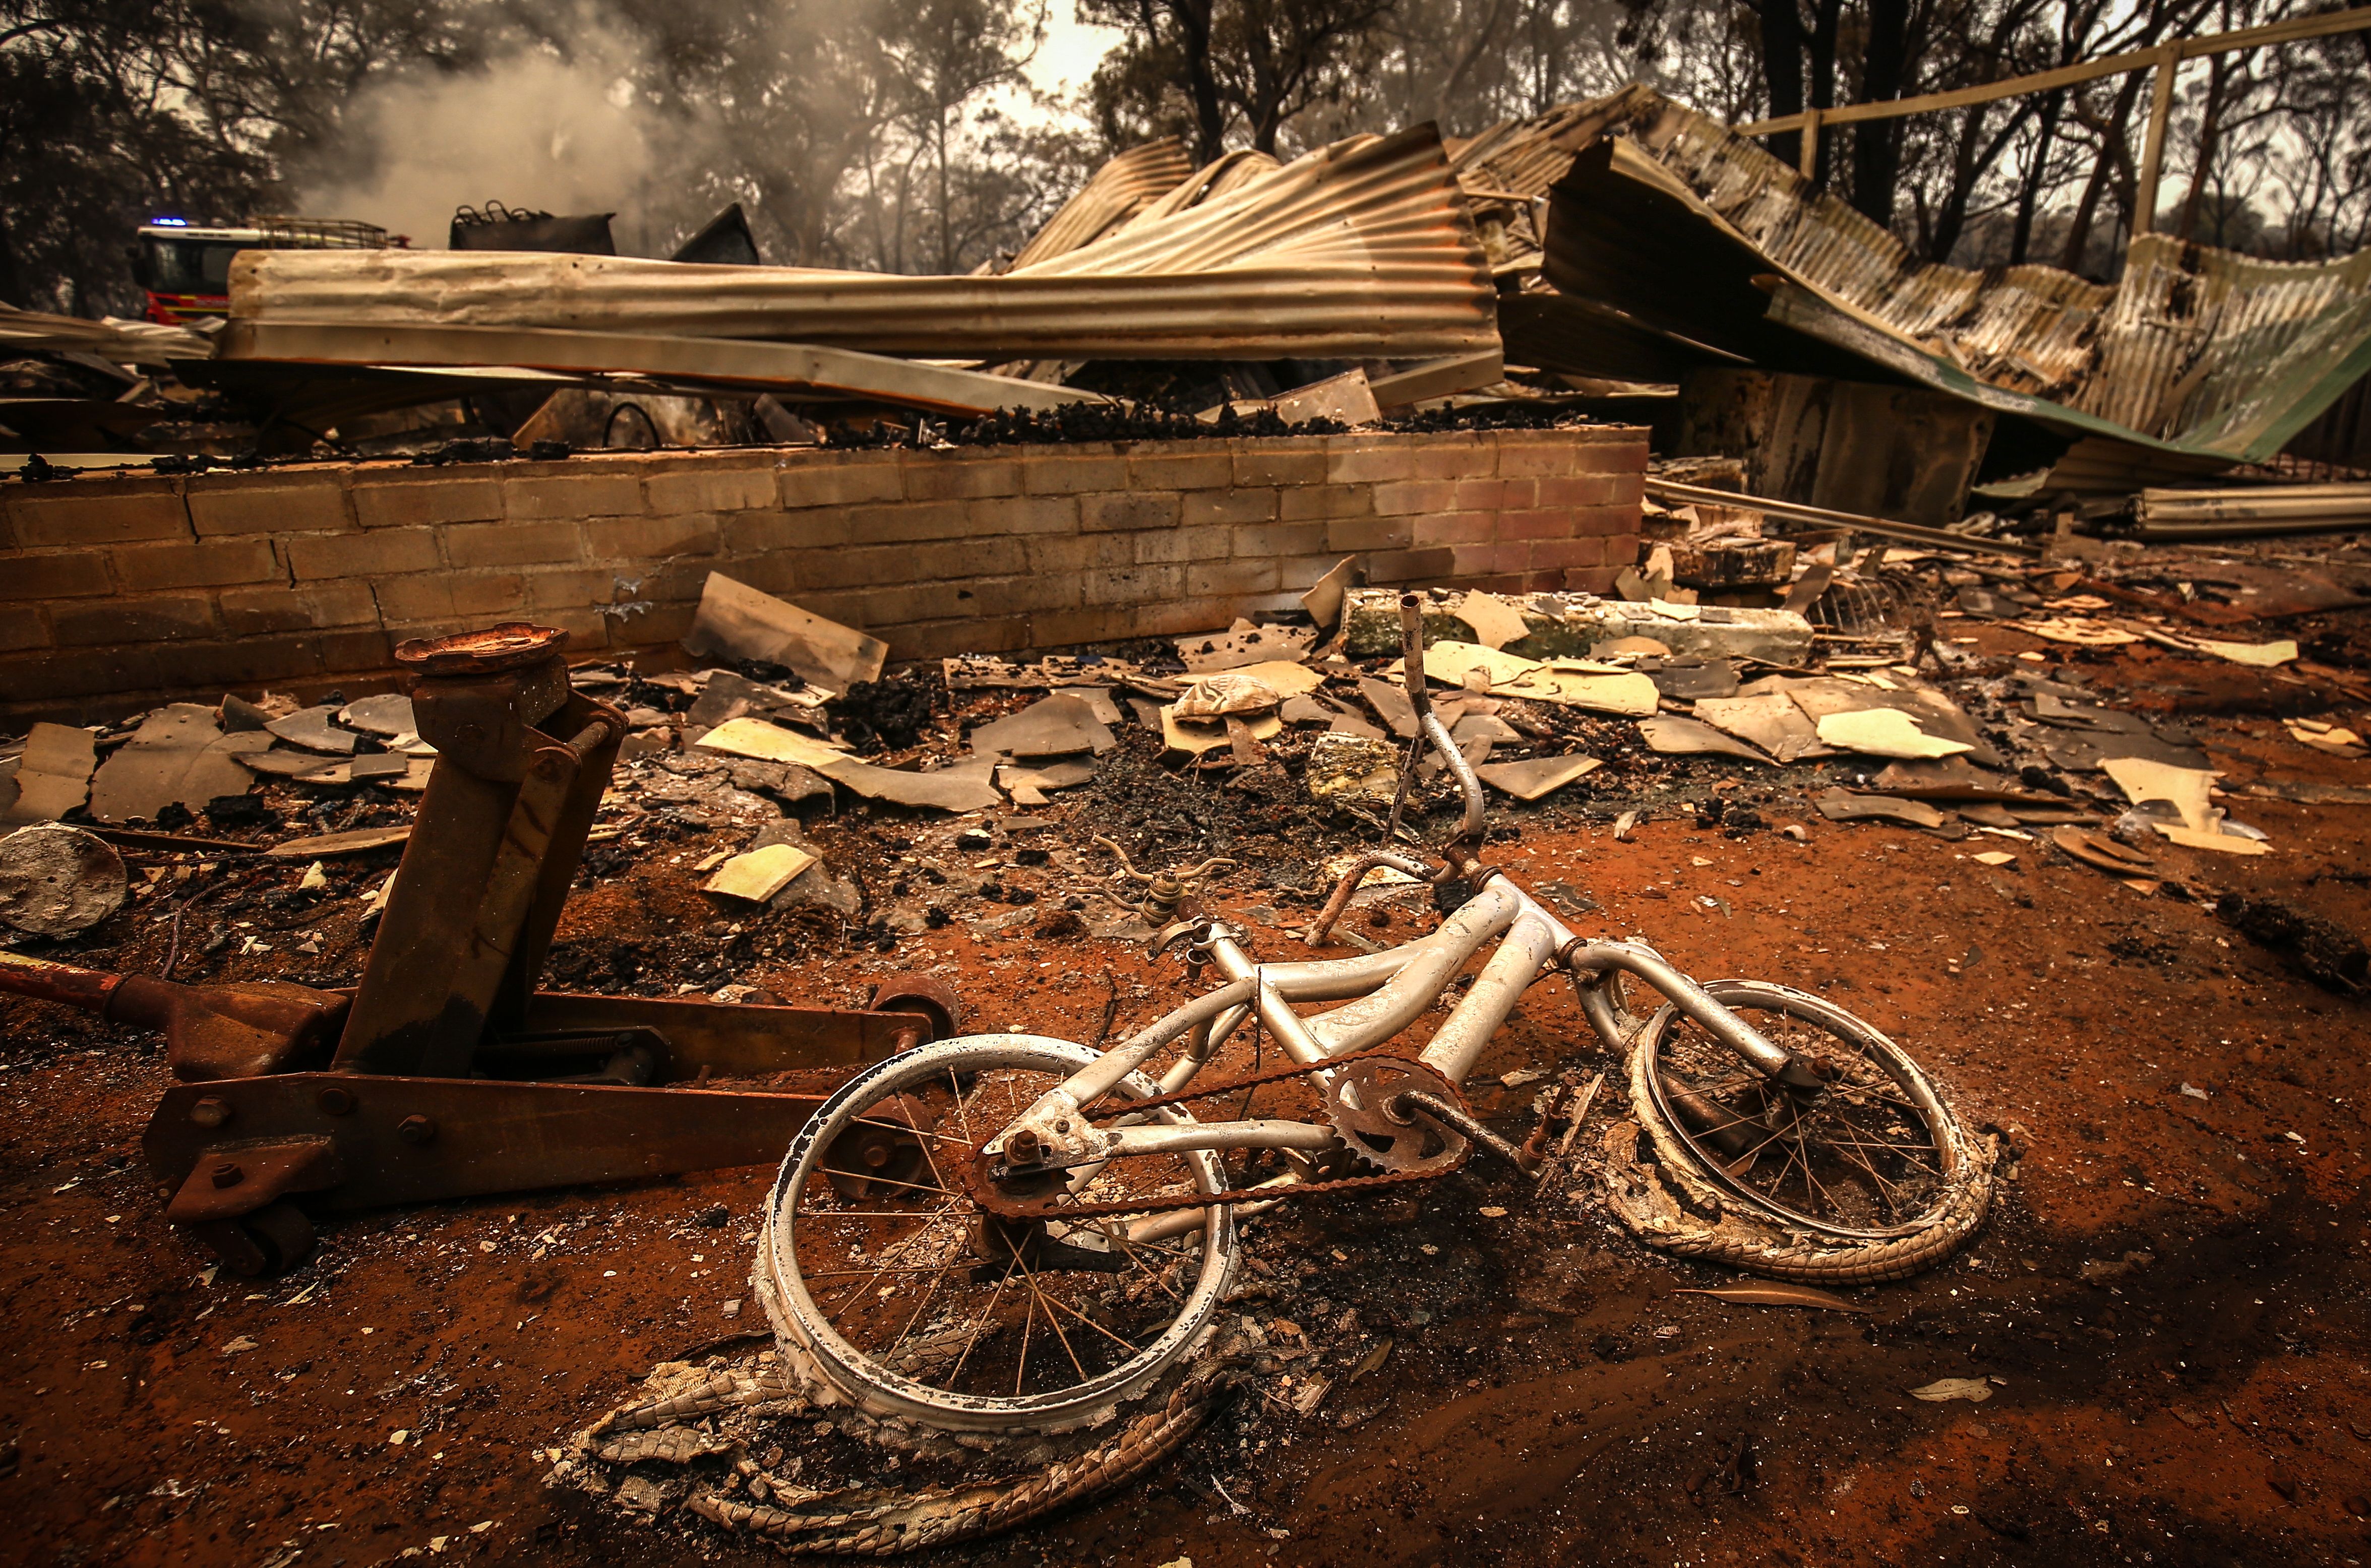 A burnt bicycle lies on the ground in front of a house recently destroyed by bushfires on the outskirts of the town of Bargo on December 21, 2019 in Sydney